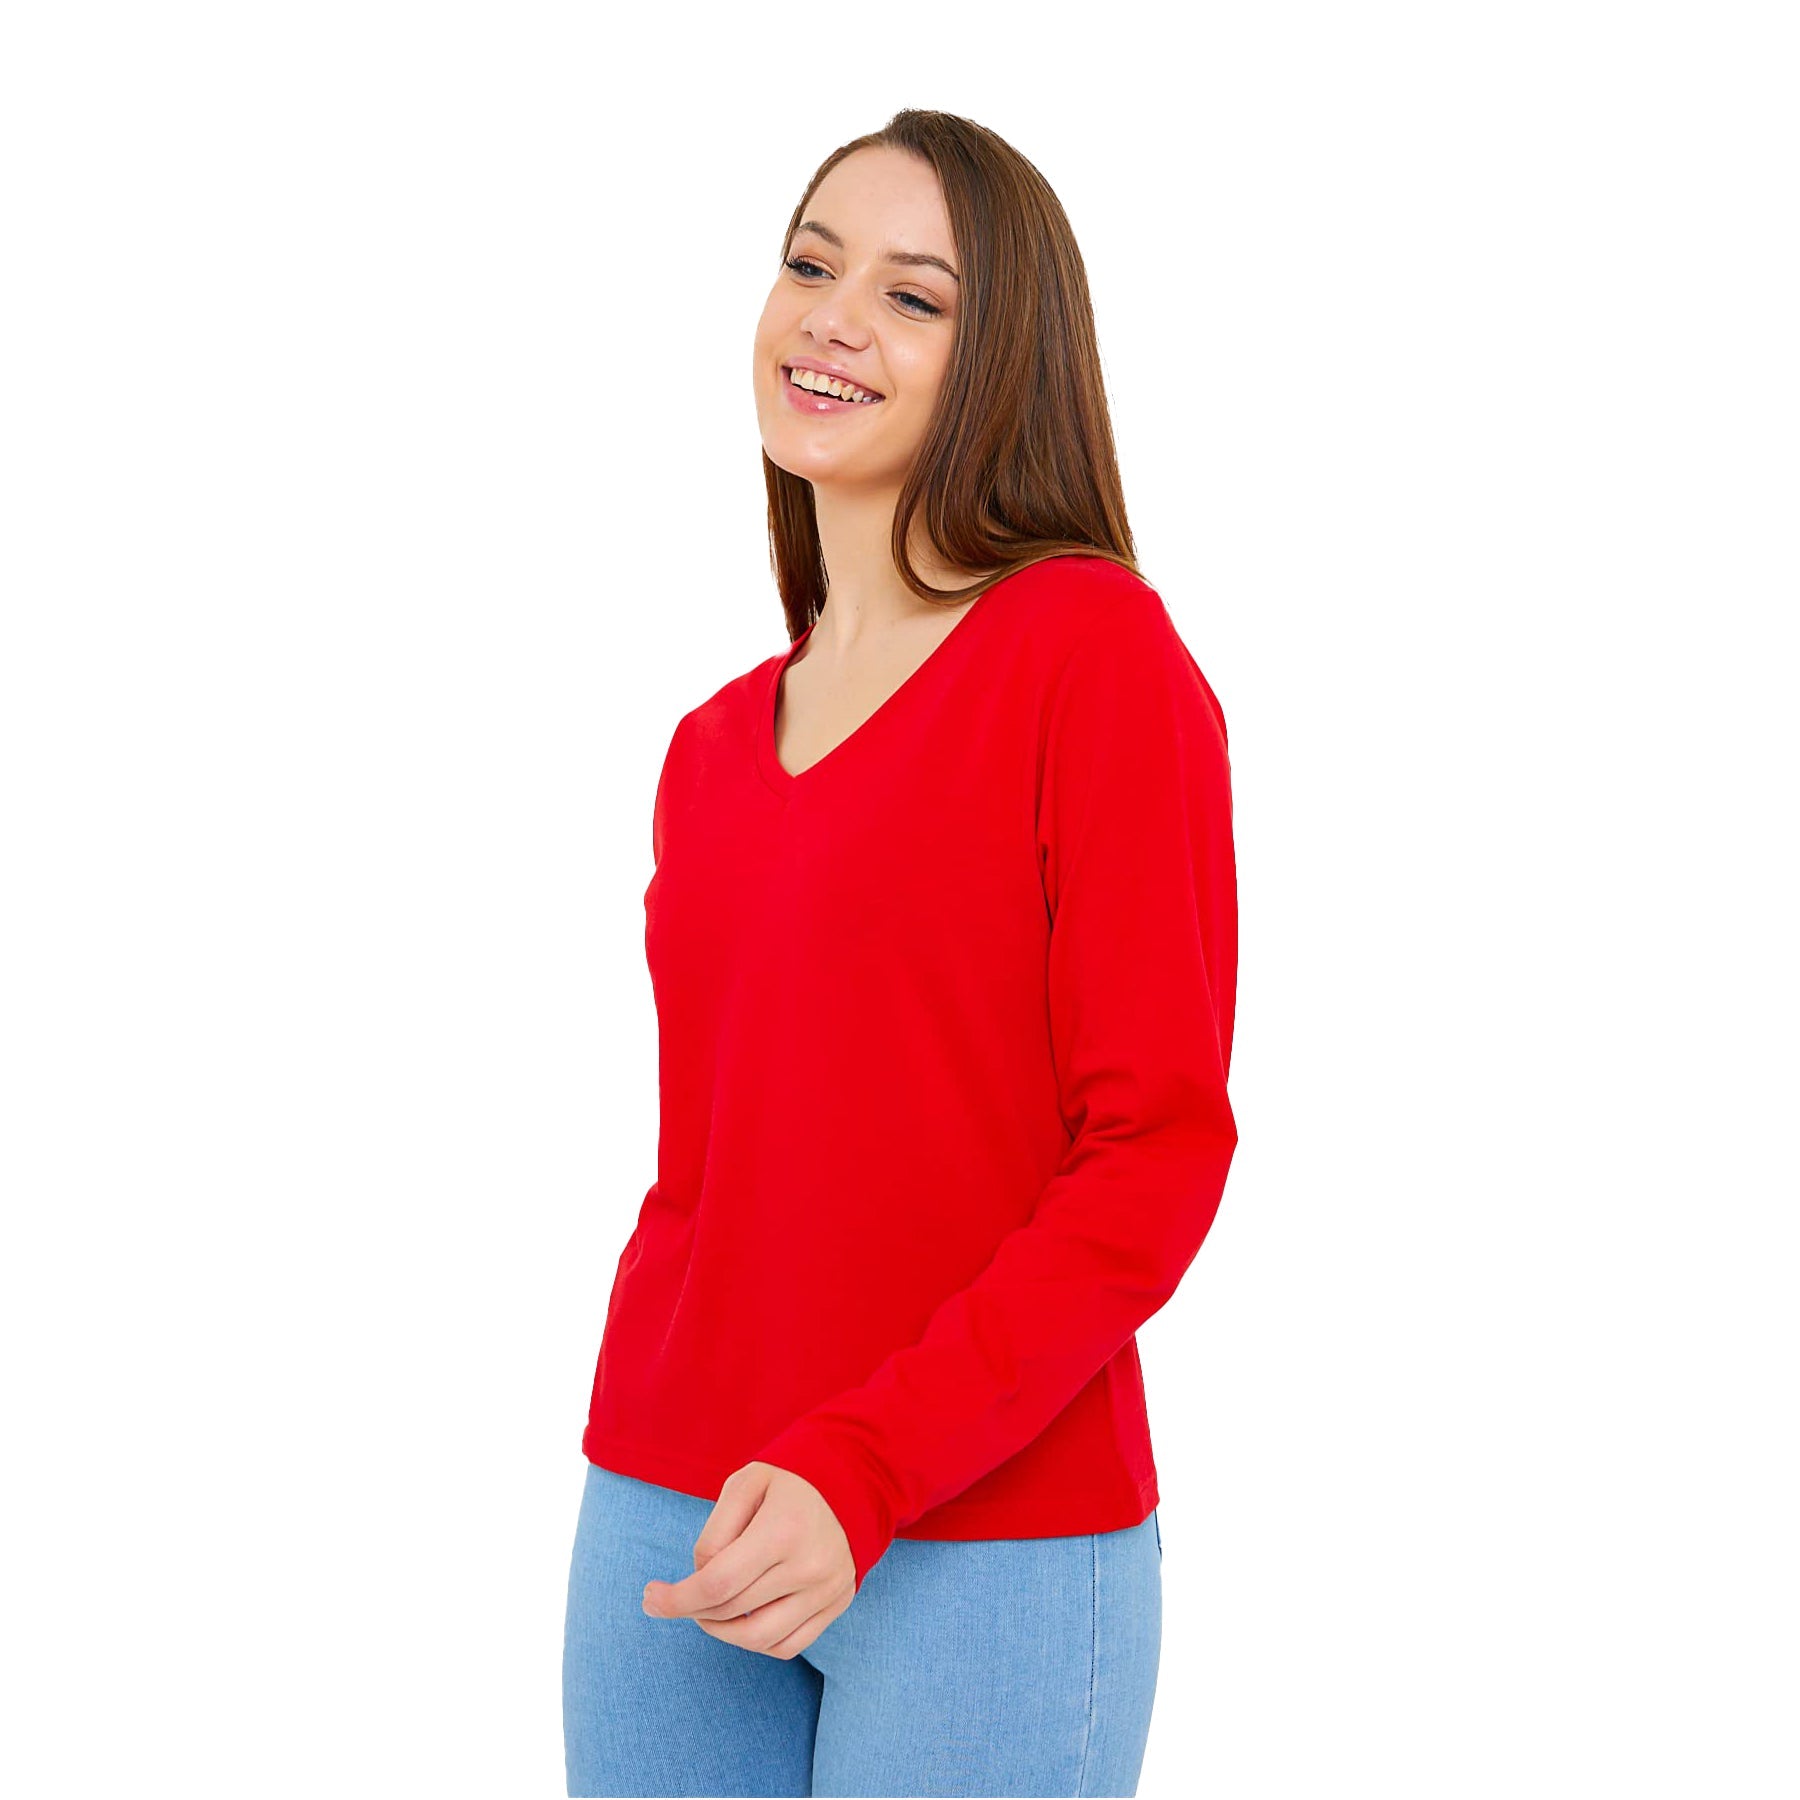 Buy red Long Sleeve V-Neck Shirts for Women &amp; Girls - Colorful Pima Cotton